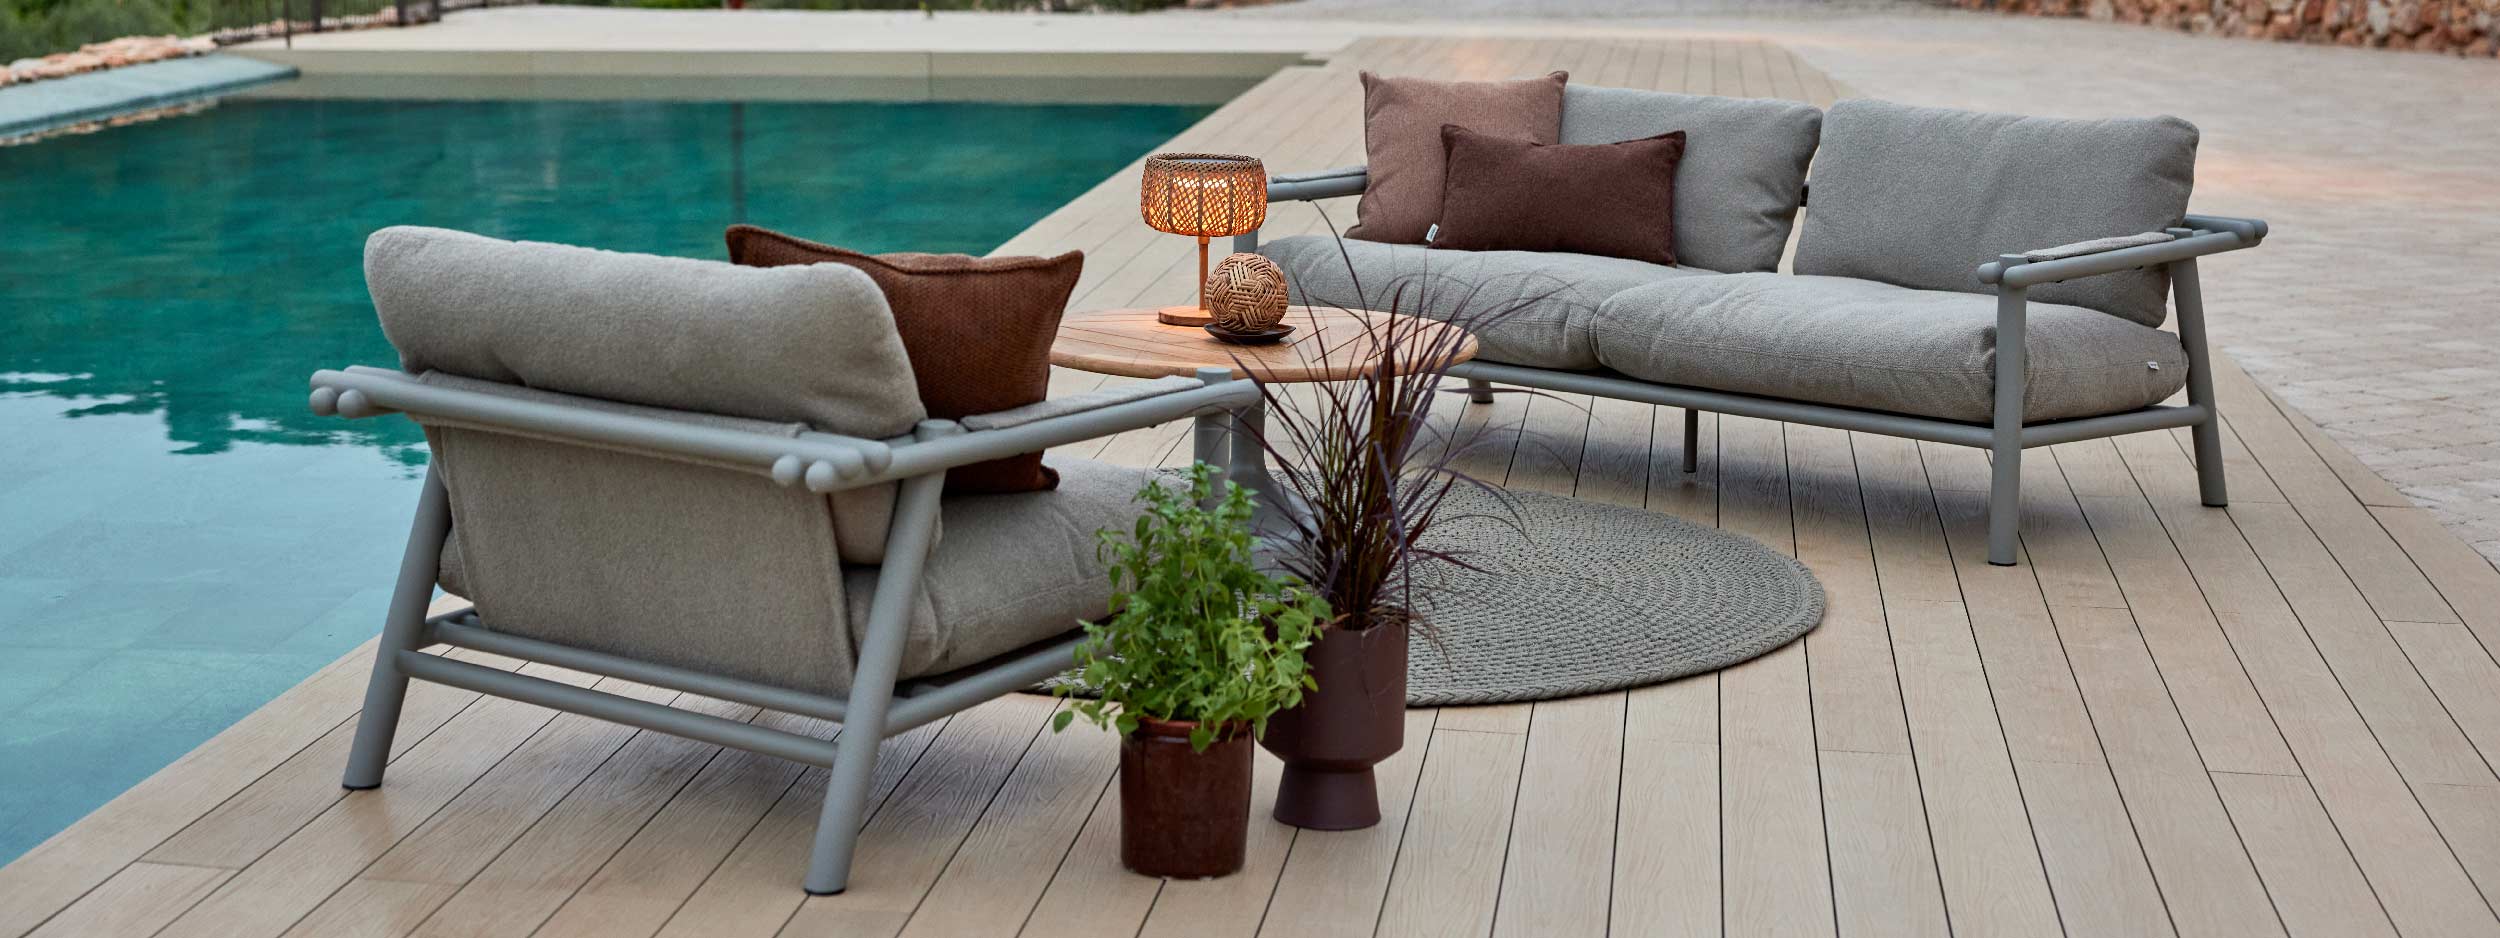 Image of Sticks taupe garden sofa and lounge chair, together with Glaze coffee table on decked poolside